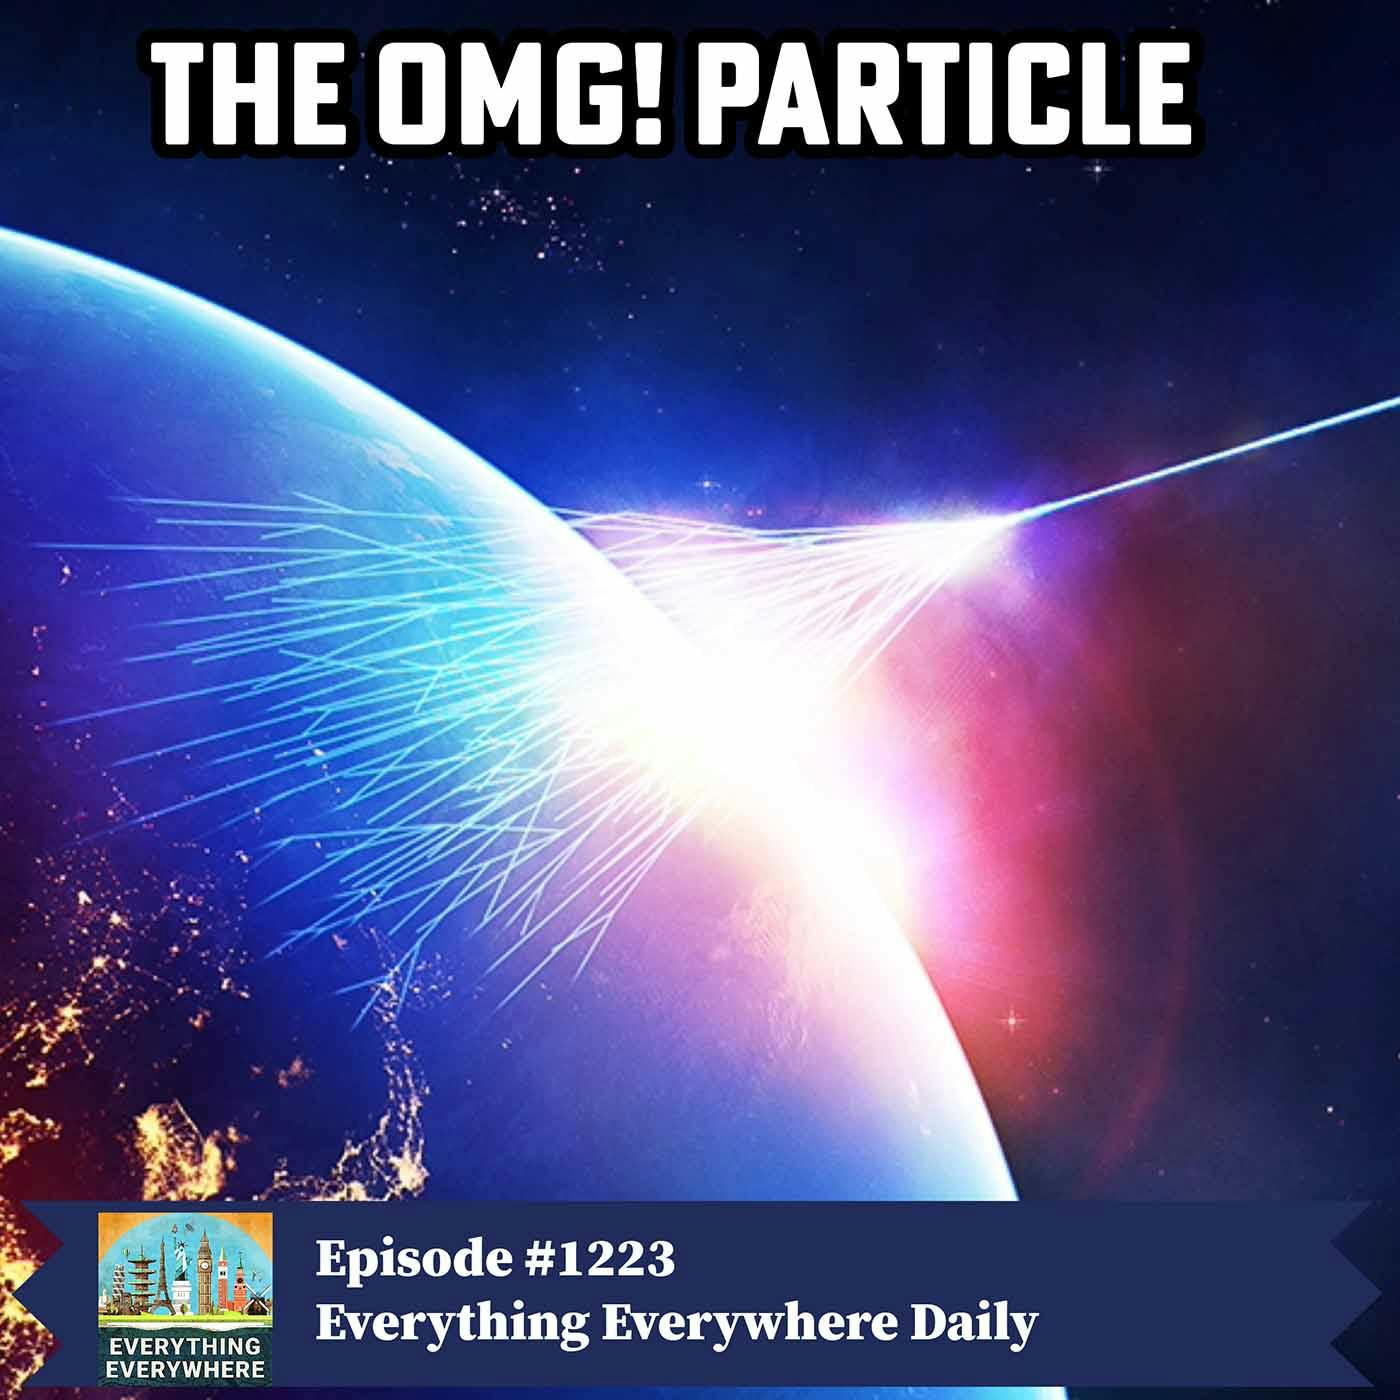 The OMG! Particle